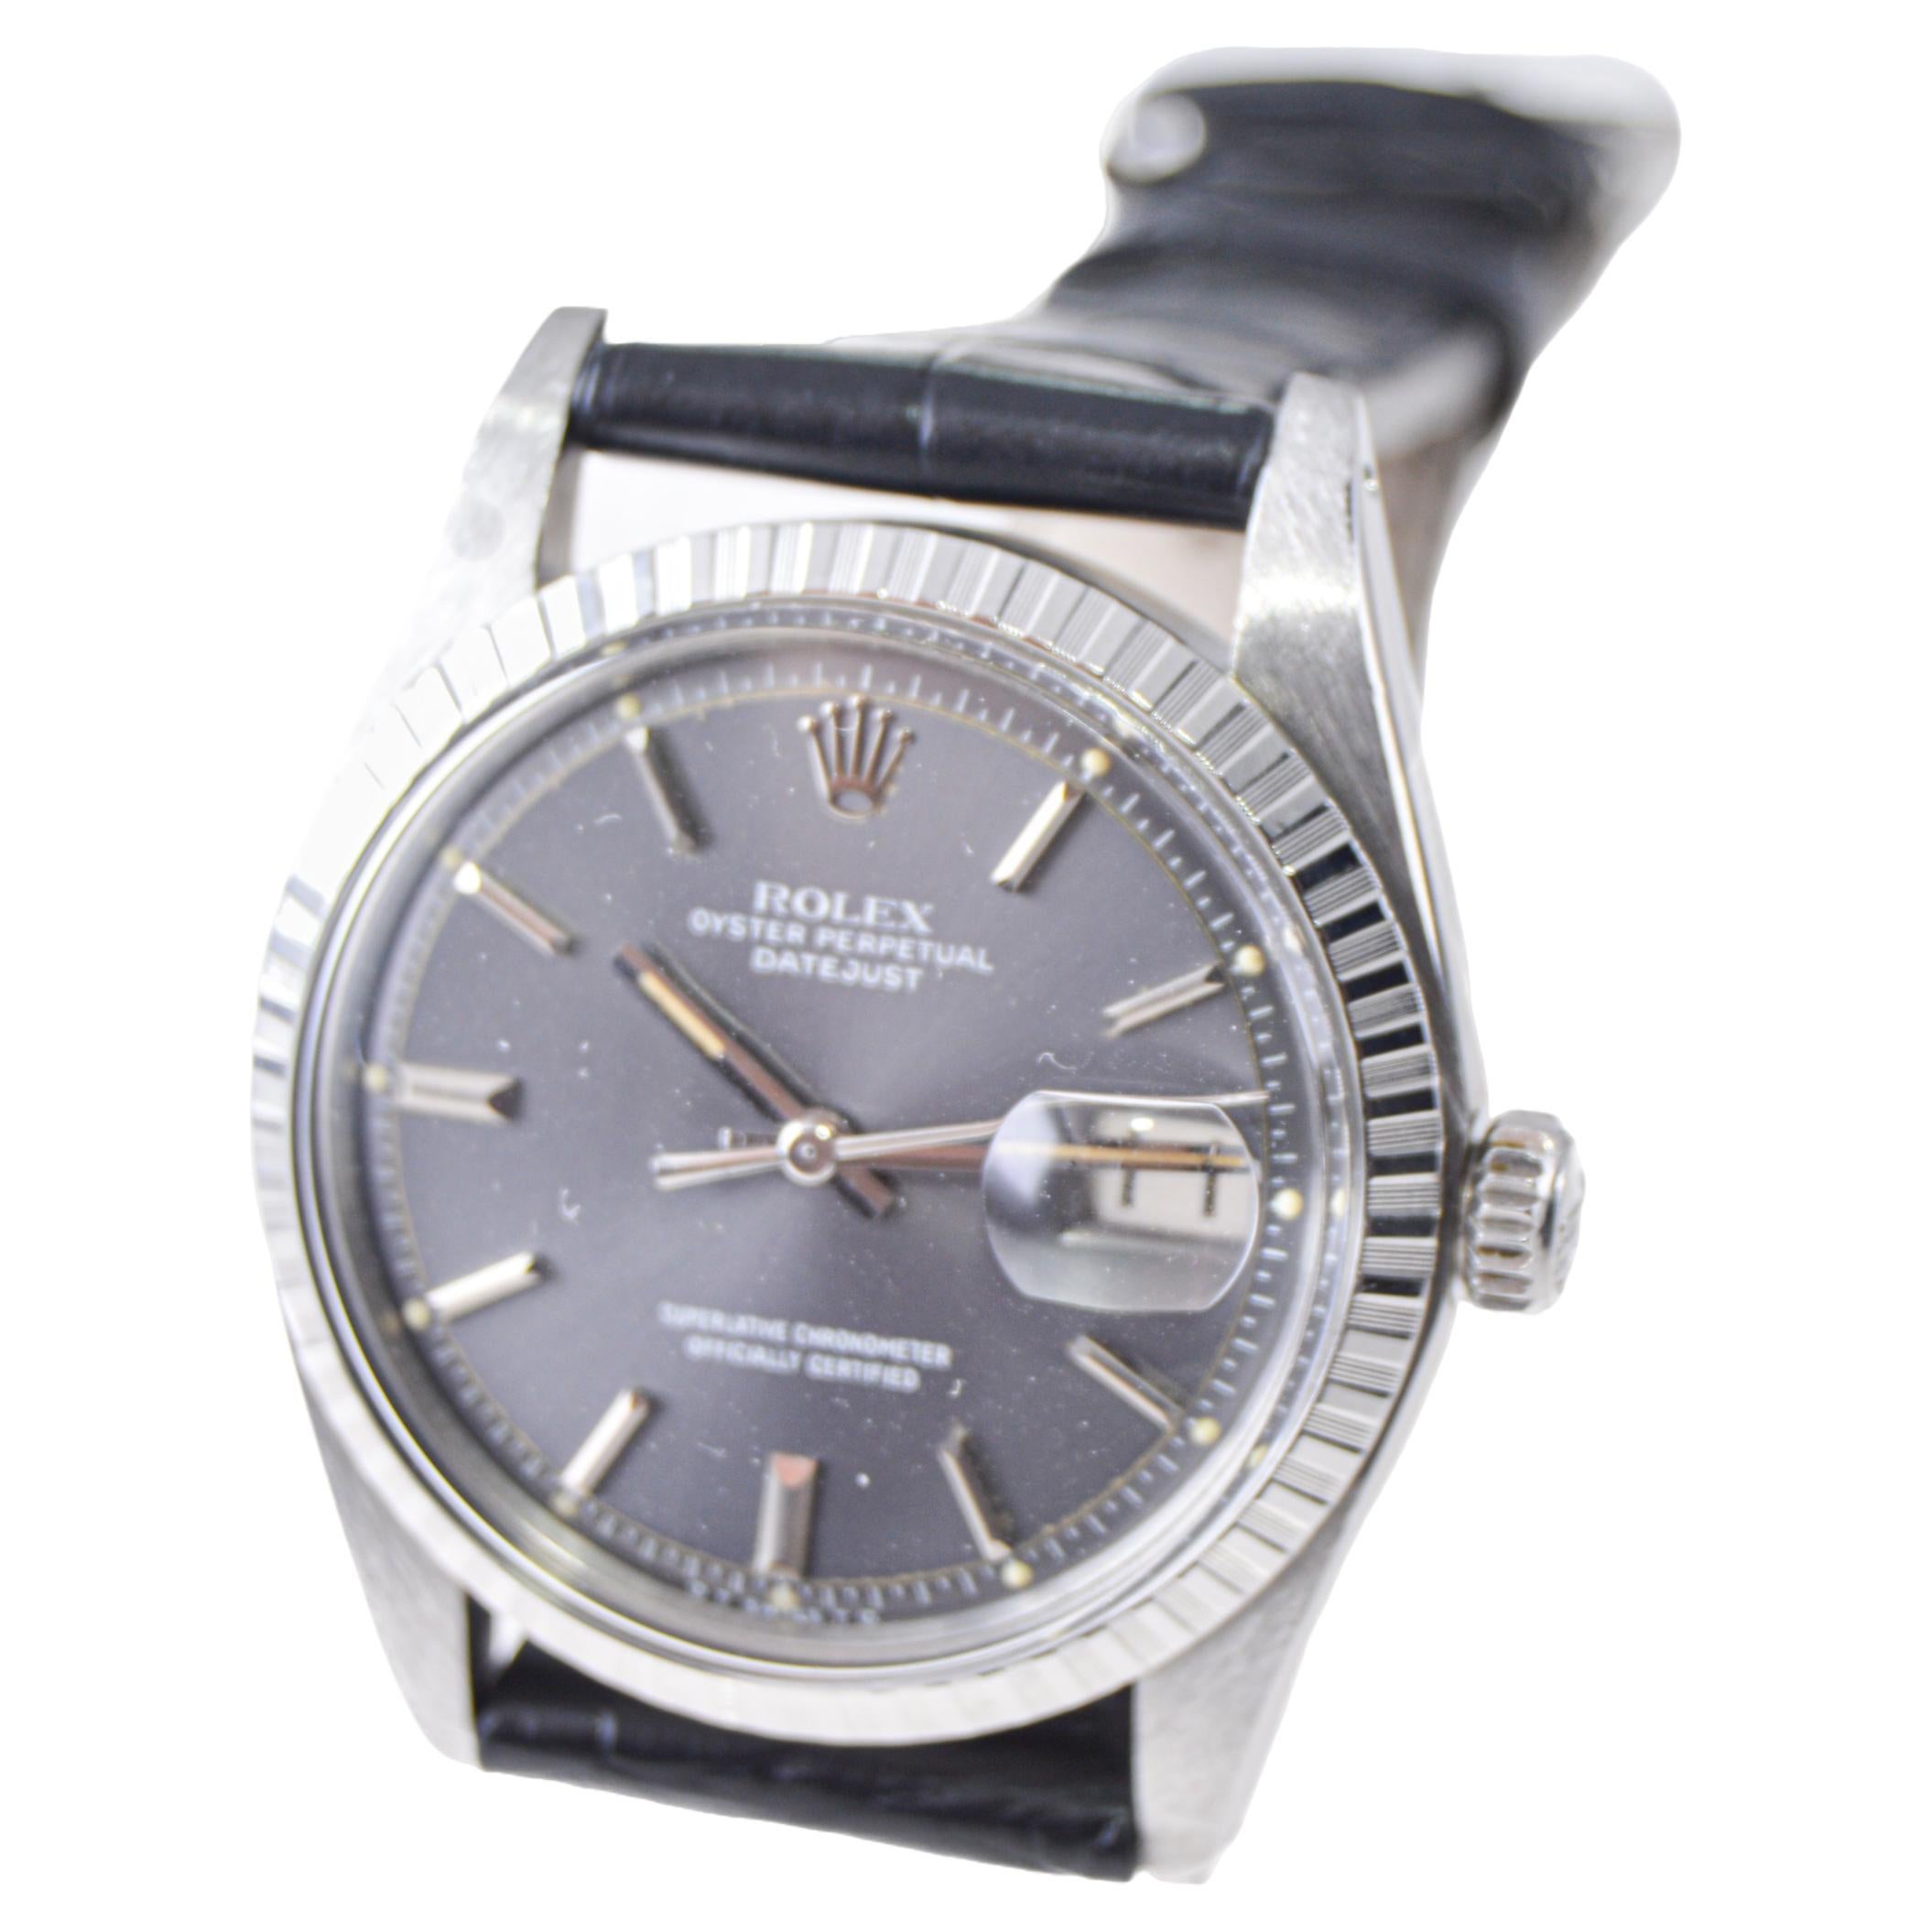 Rolex Steel Datejust with Rare Original Charcoal Dial from, 1960's For Sale 3